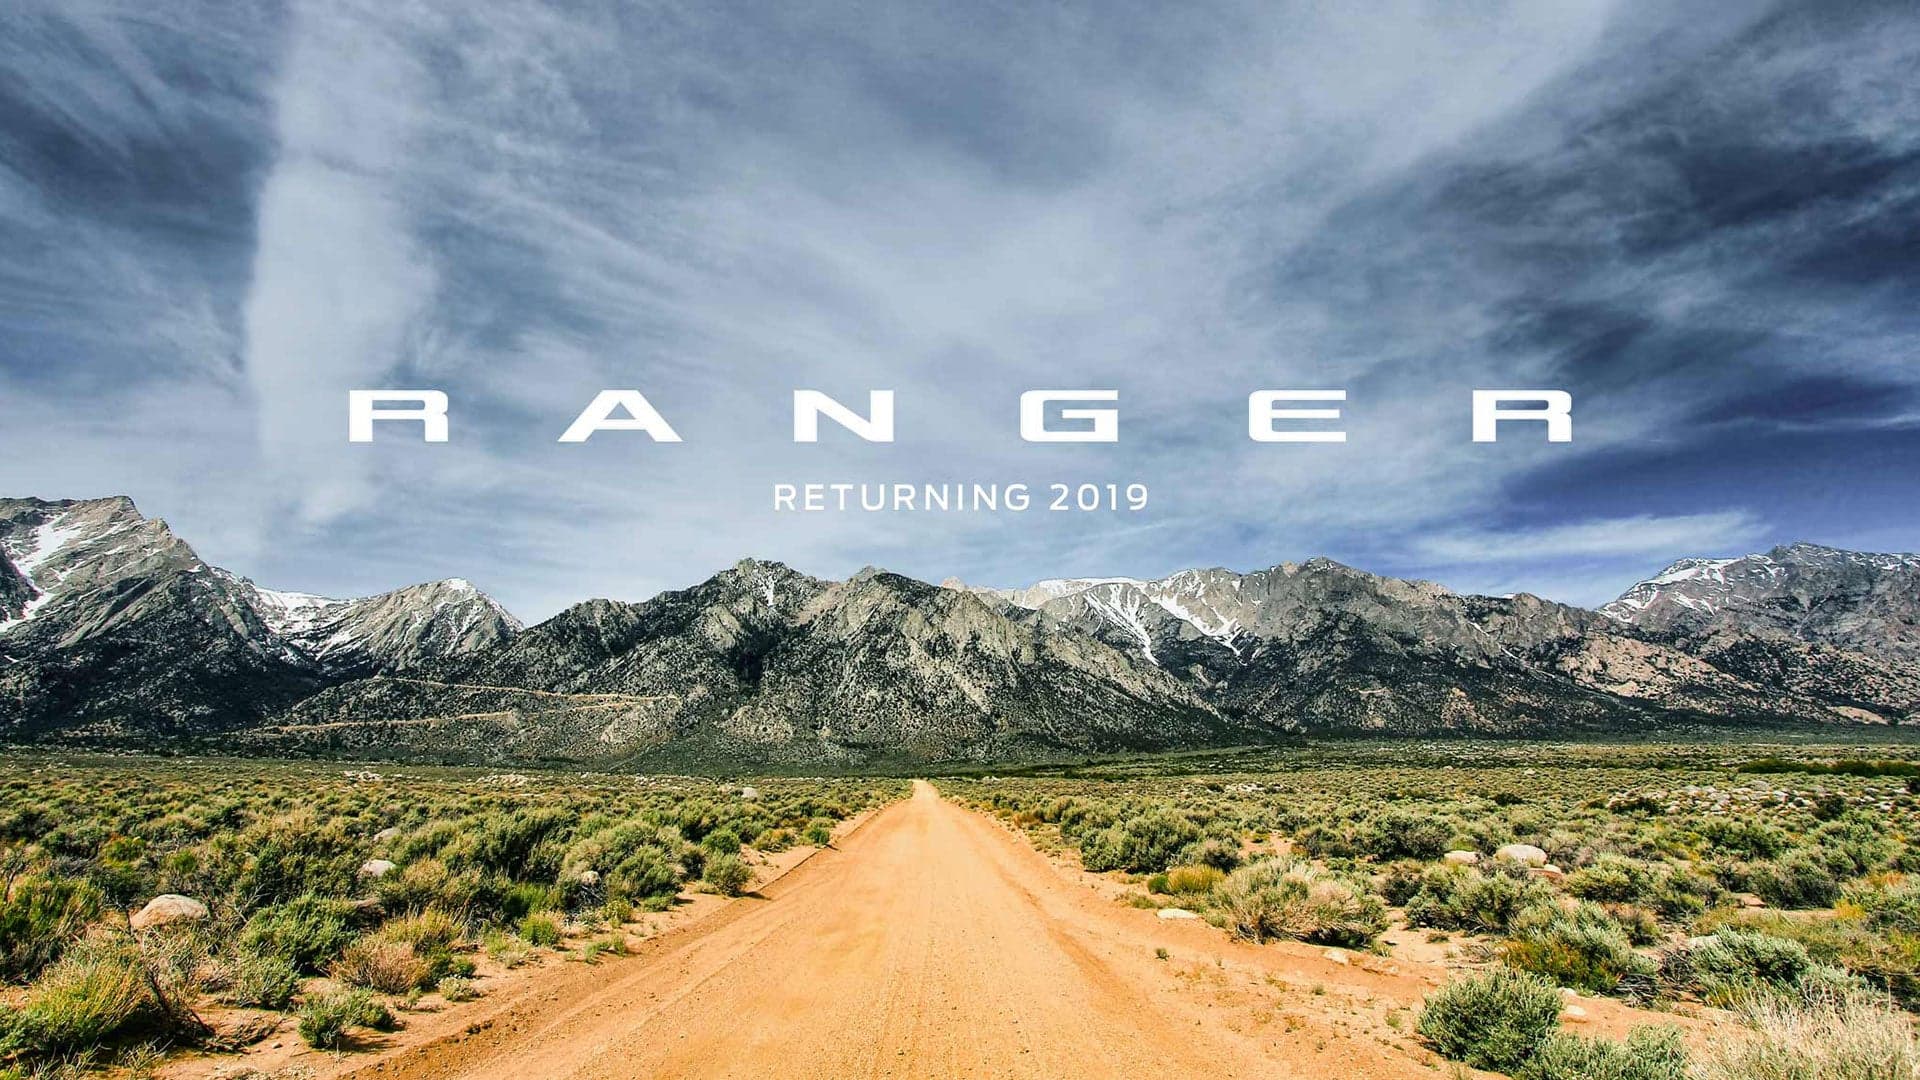 The New Ford Ranger Website Is Officially Online